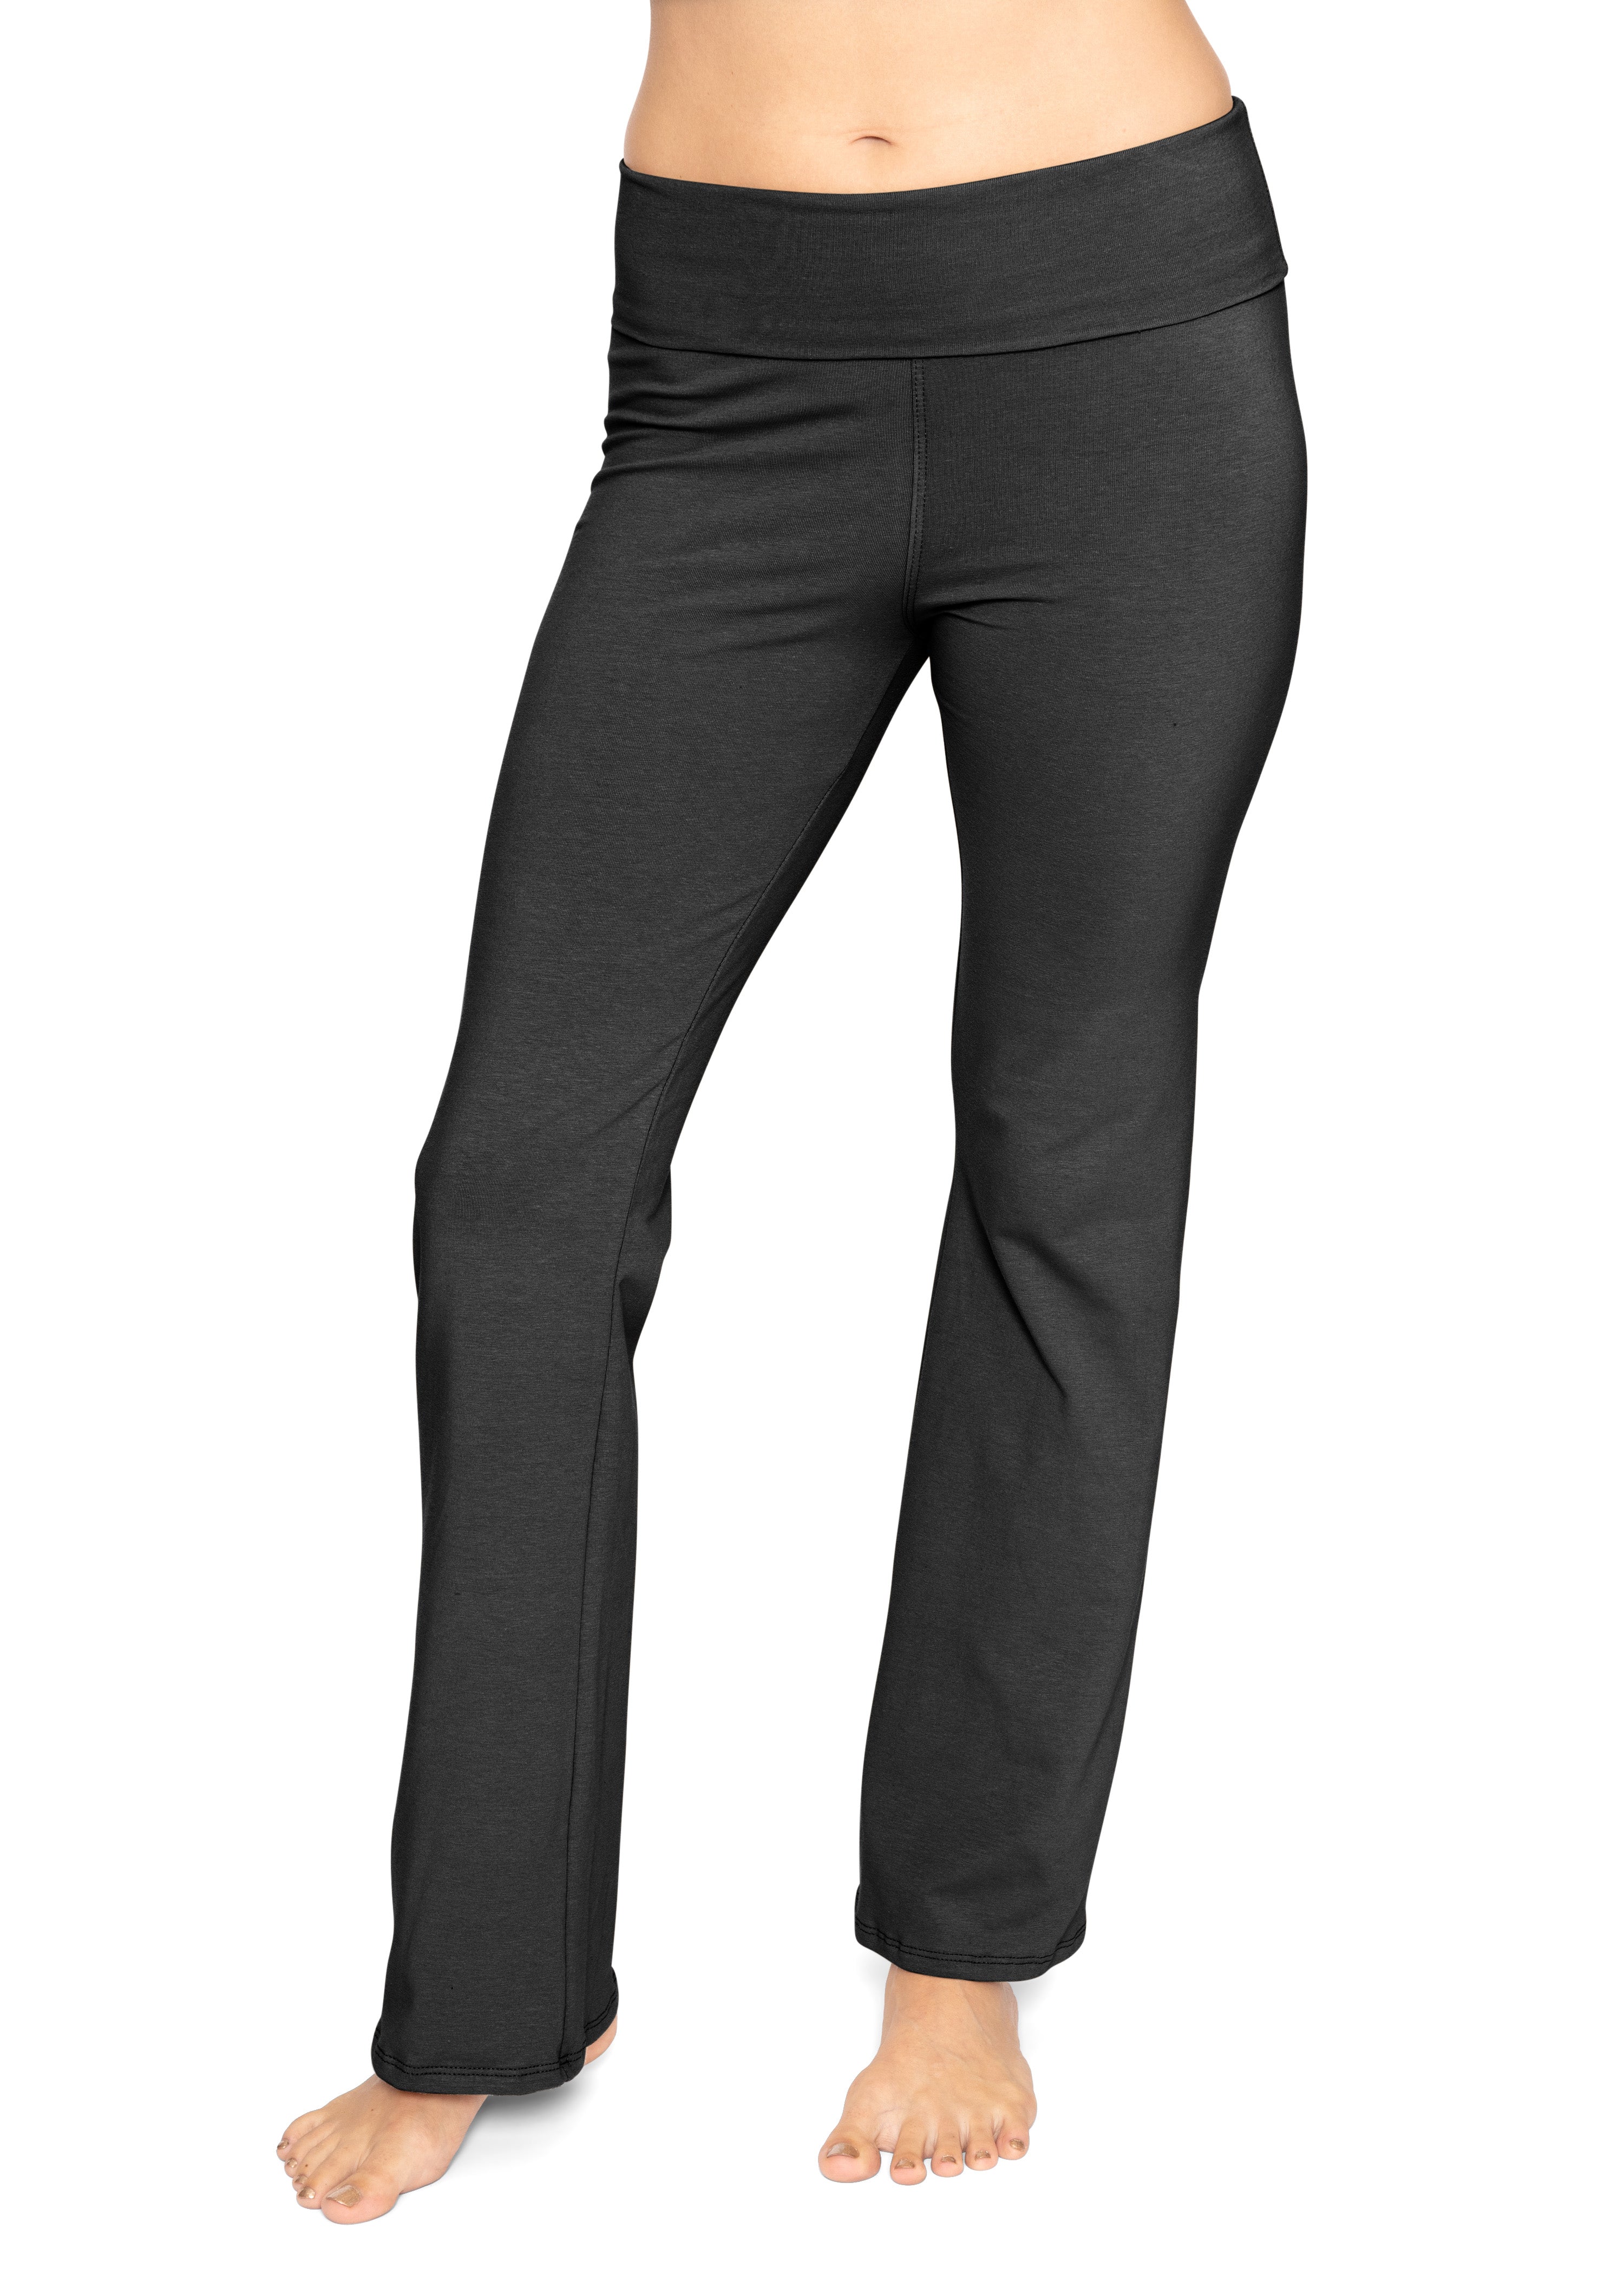 Stretch Is Comfort Women's Foldover Yoga Pant | Adult Small -7x - image 1 of 6